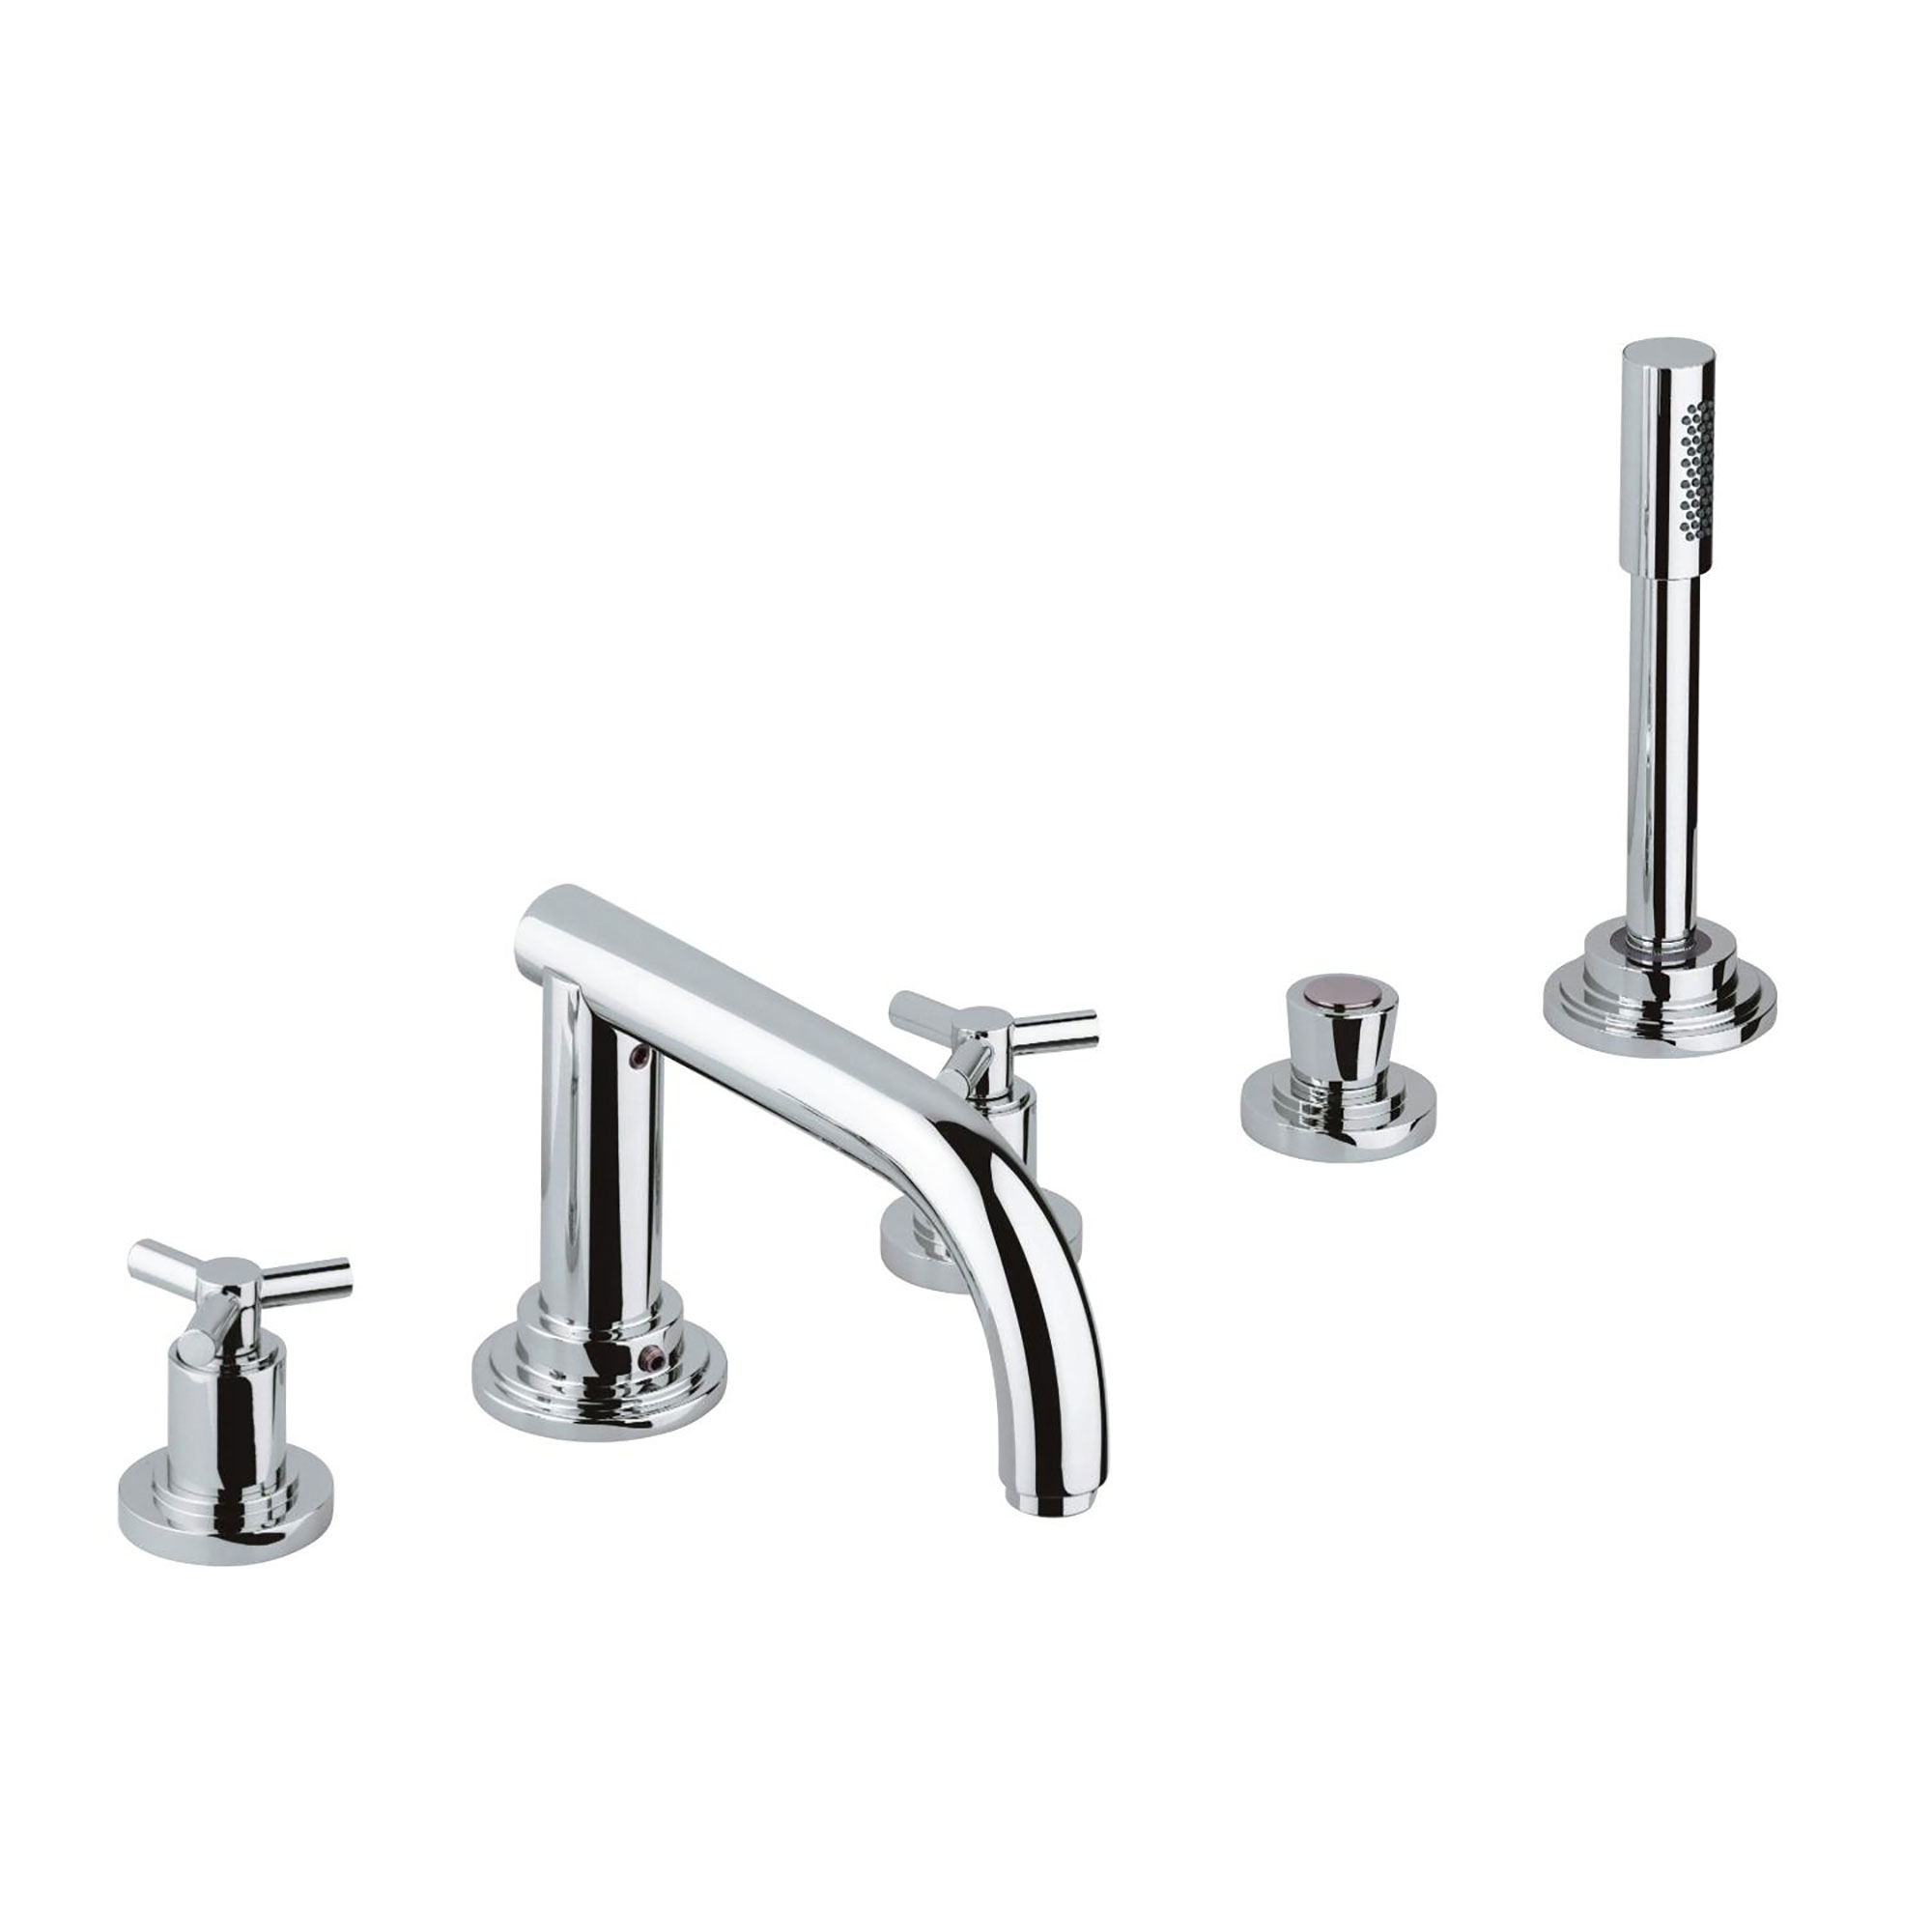 5-Hole 2-Handle Deck Mount Roman Tub Faucet with 9.5 L/min (2.5 gpm) Hand Shower